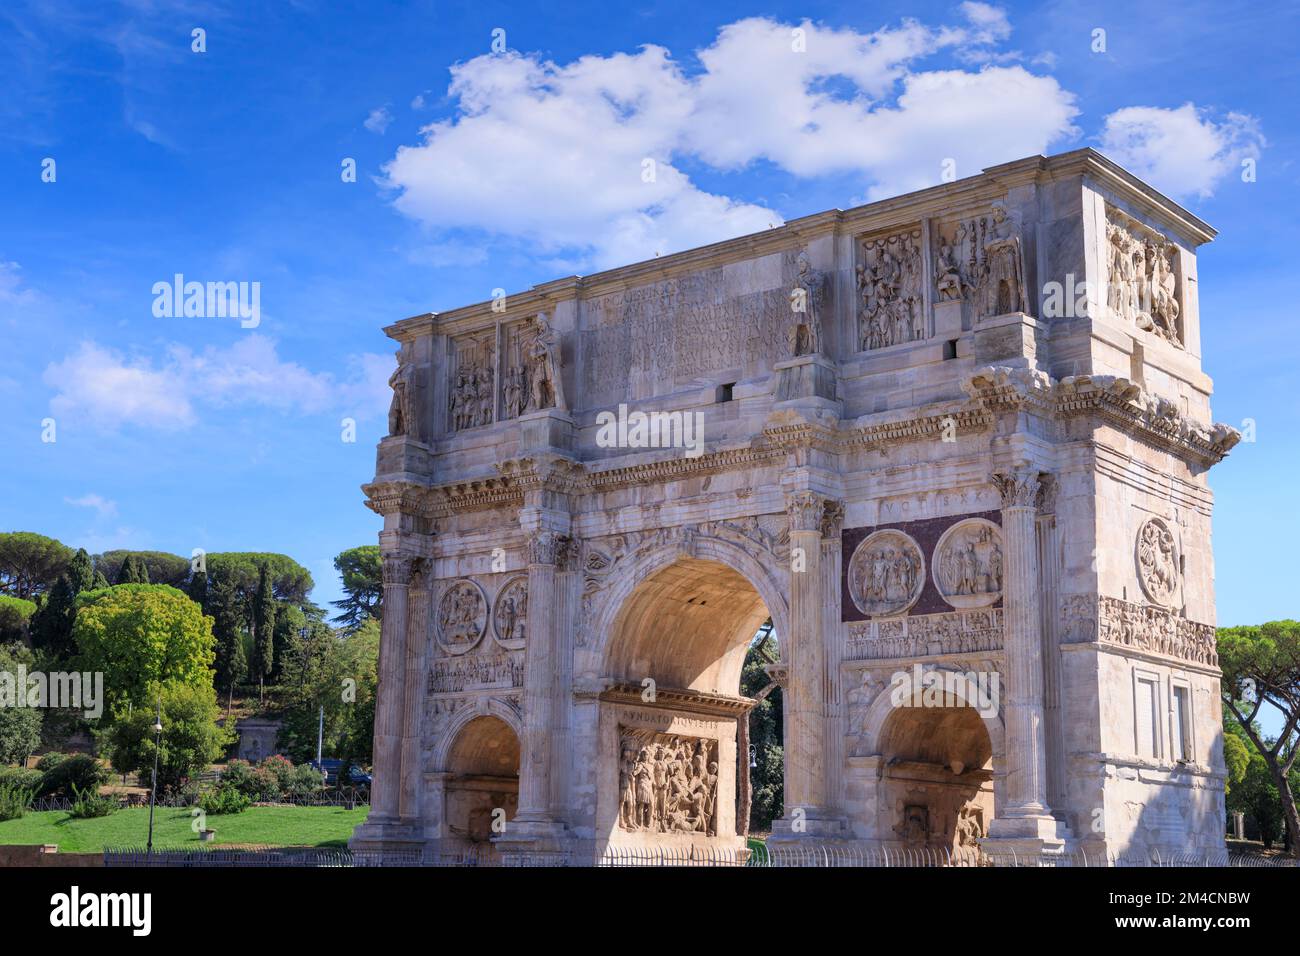 The Arch of Constantine in Rome, Italy. Stock Photo